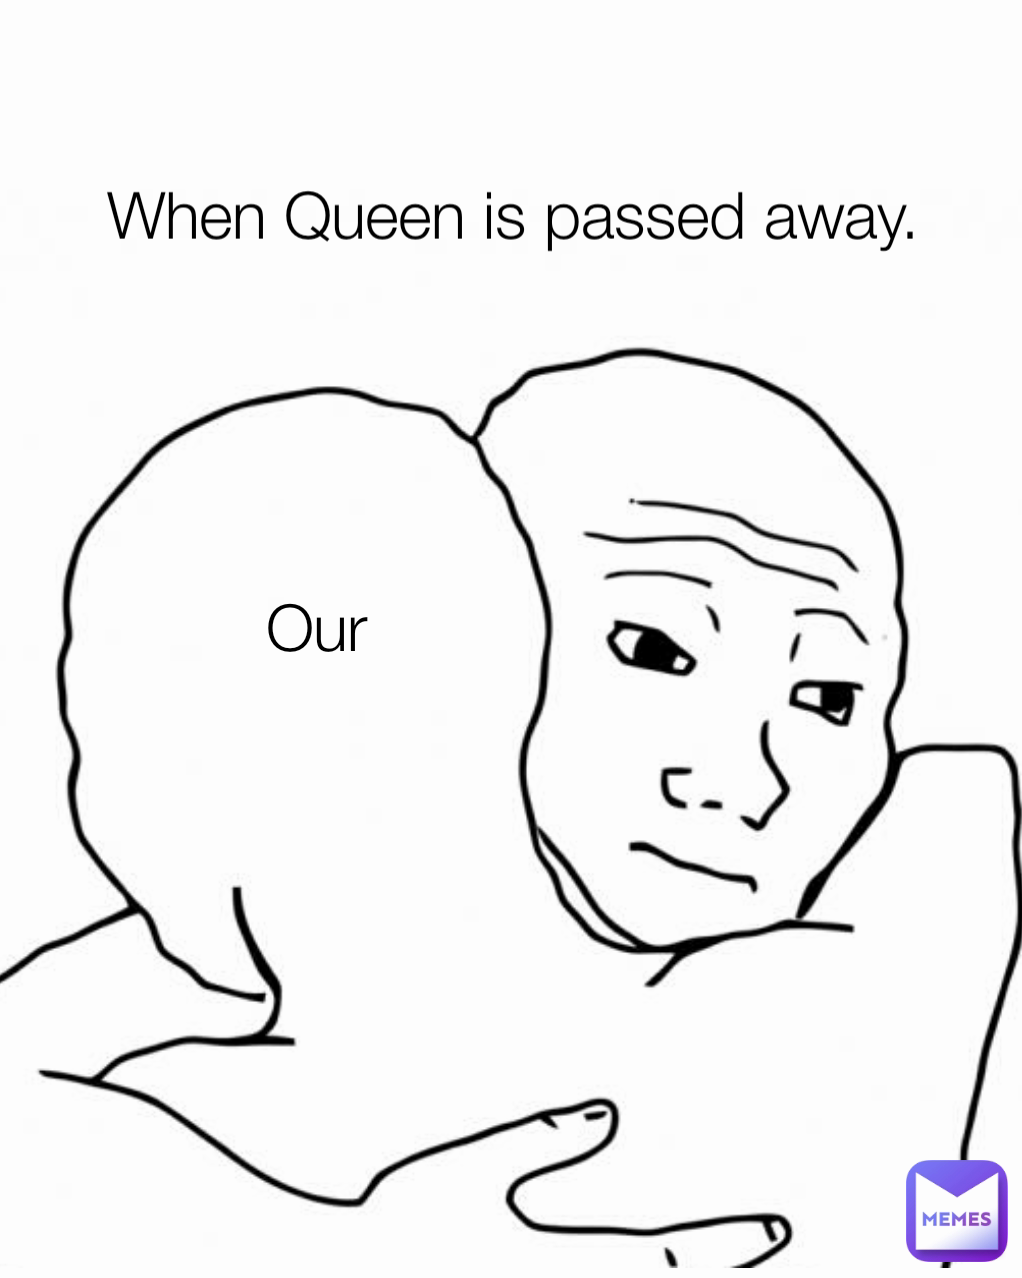 Our When Queen is passed away.